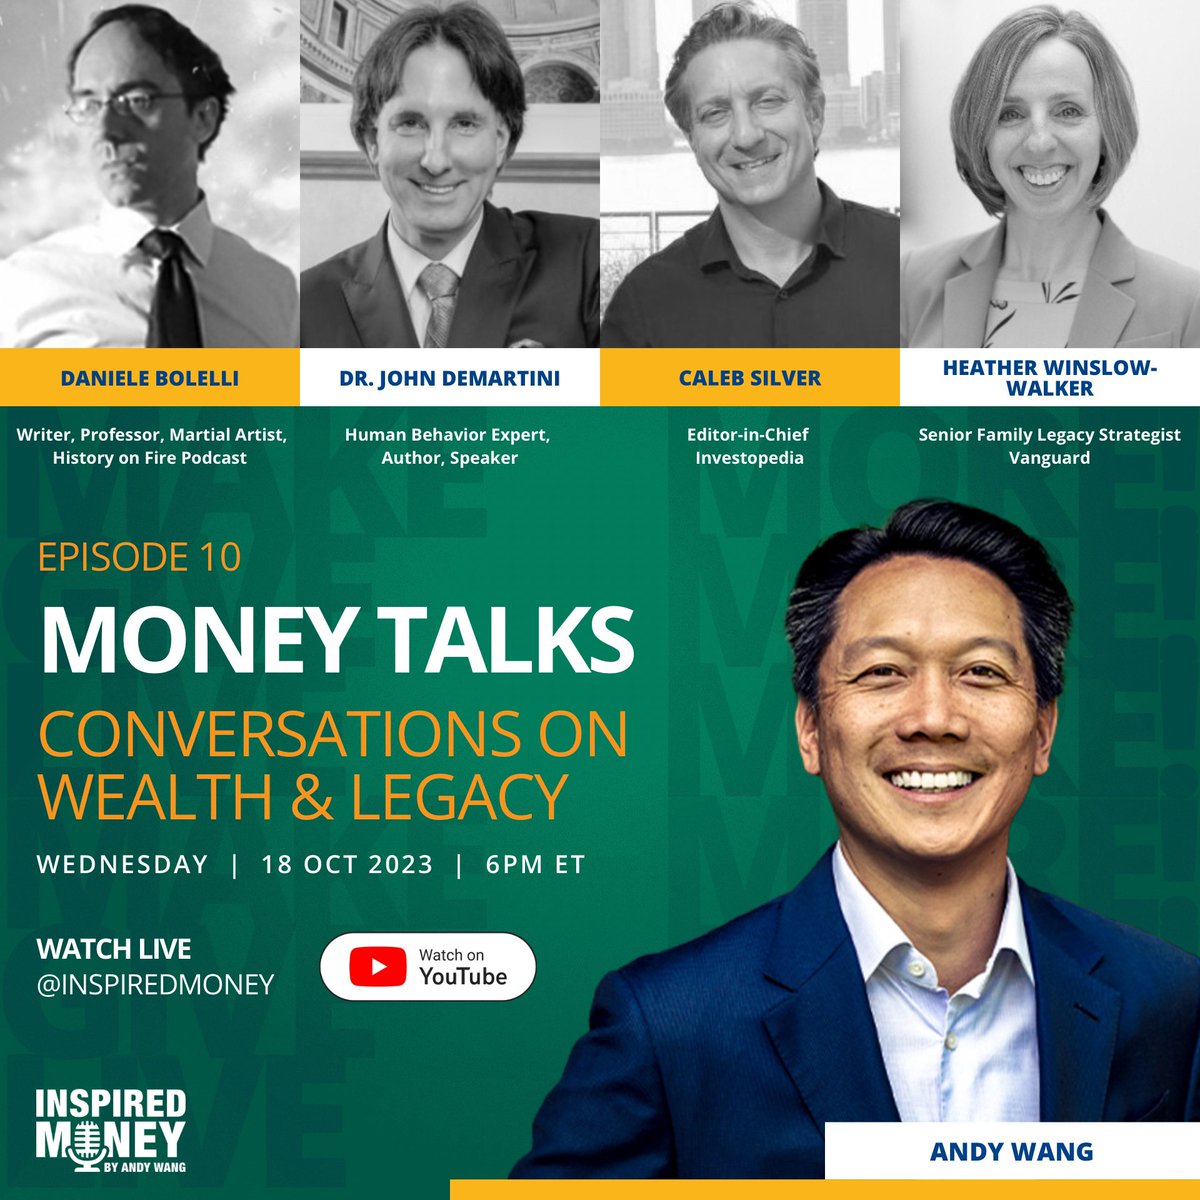 Watch this fascinating discussion on wealth and legacy with a historian, human behavior expert, award-winning financial journalist, and Senior Family Legacy Strategist at Vanguard. Hope you'll join me on this inspired journey. Watch here: youtube.com/live/Ayb9tVpFe…